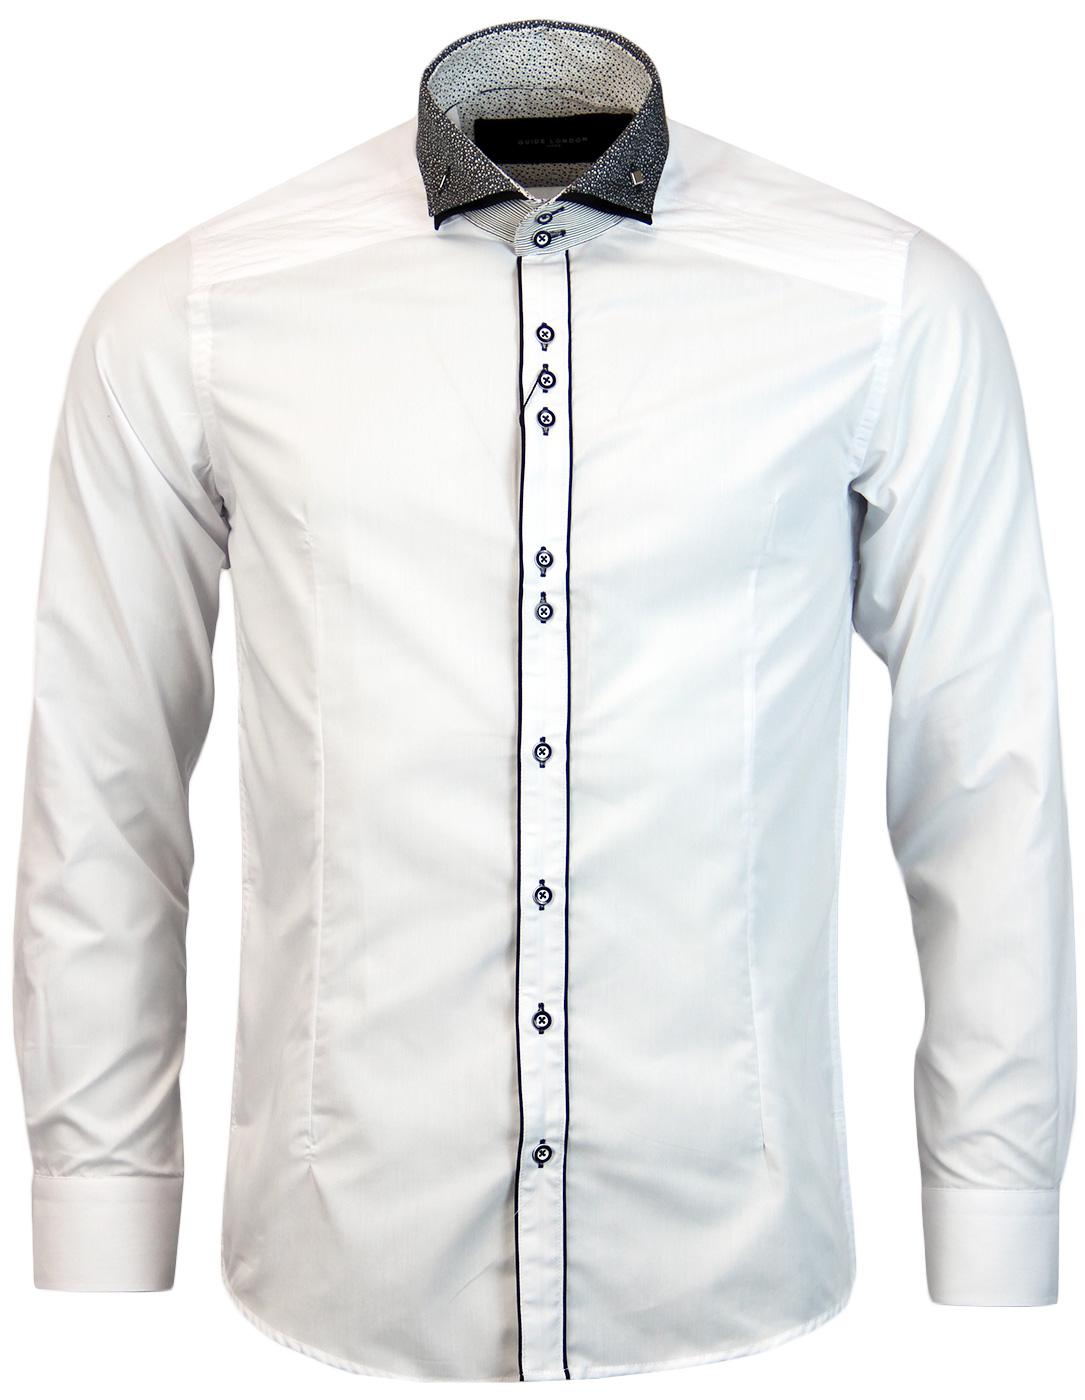 GUIDE LONDON Retro Patterned Double Collar Shirt